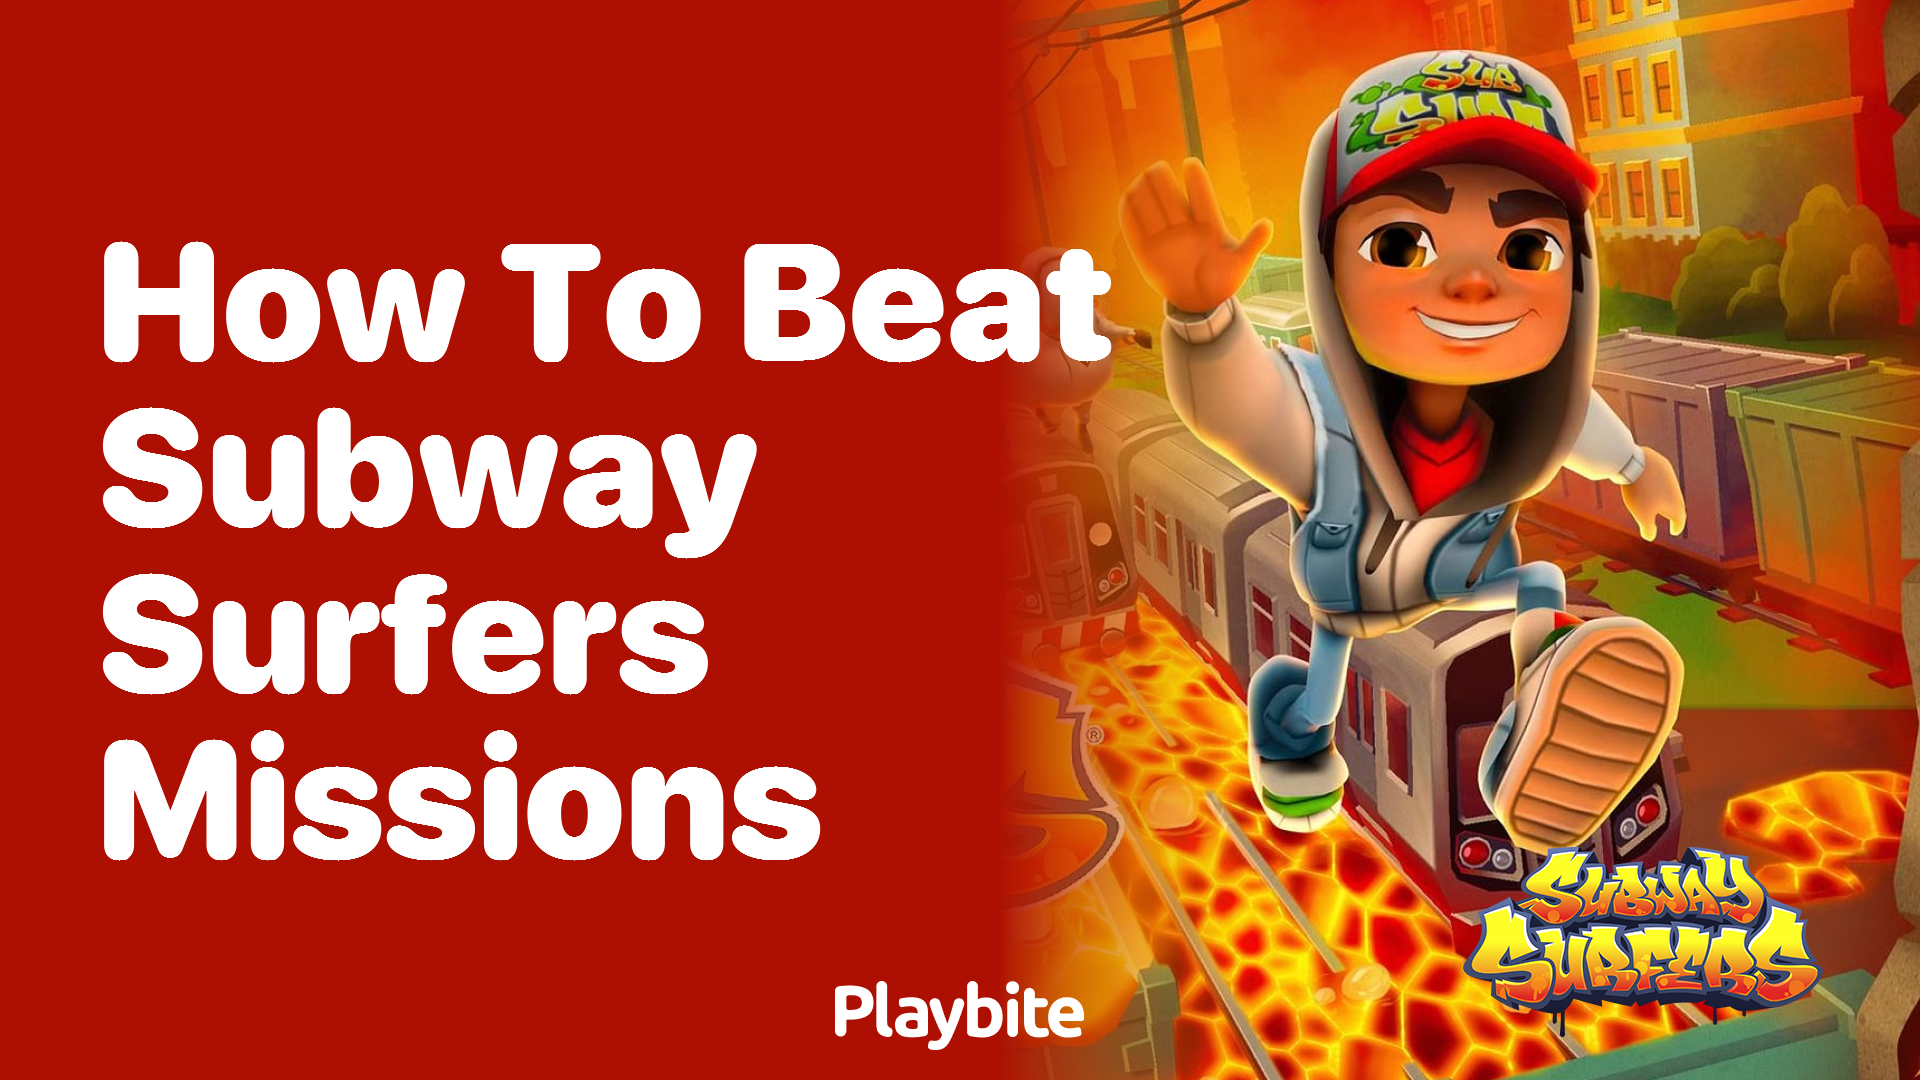 How to Beat Subway Surfers Missions